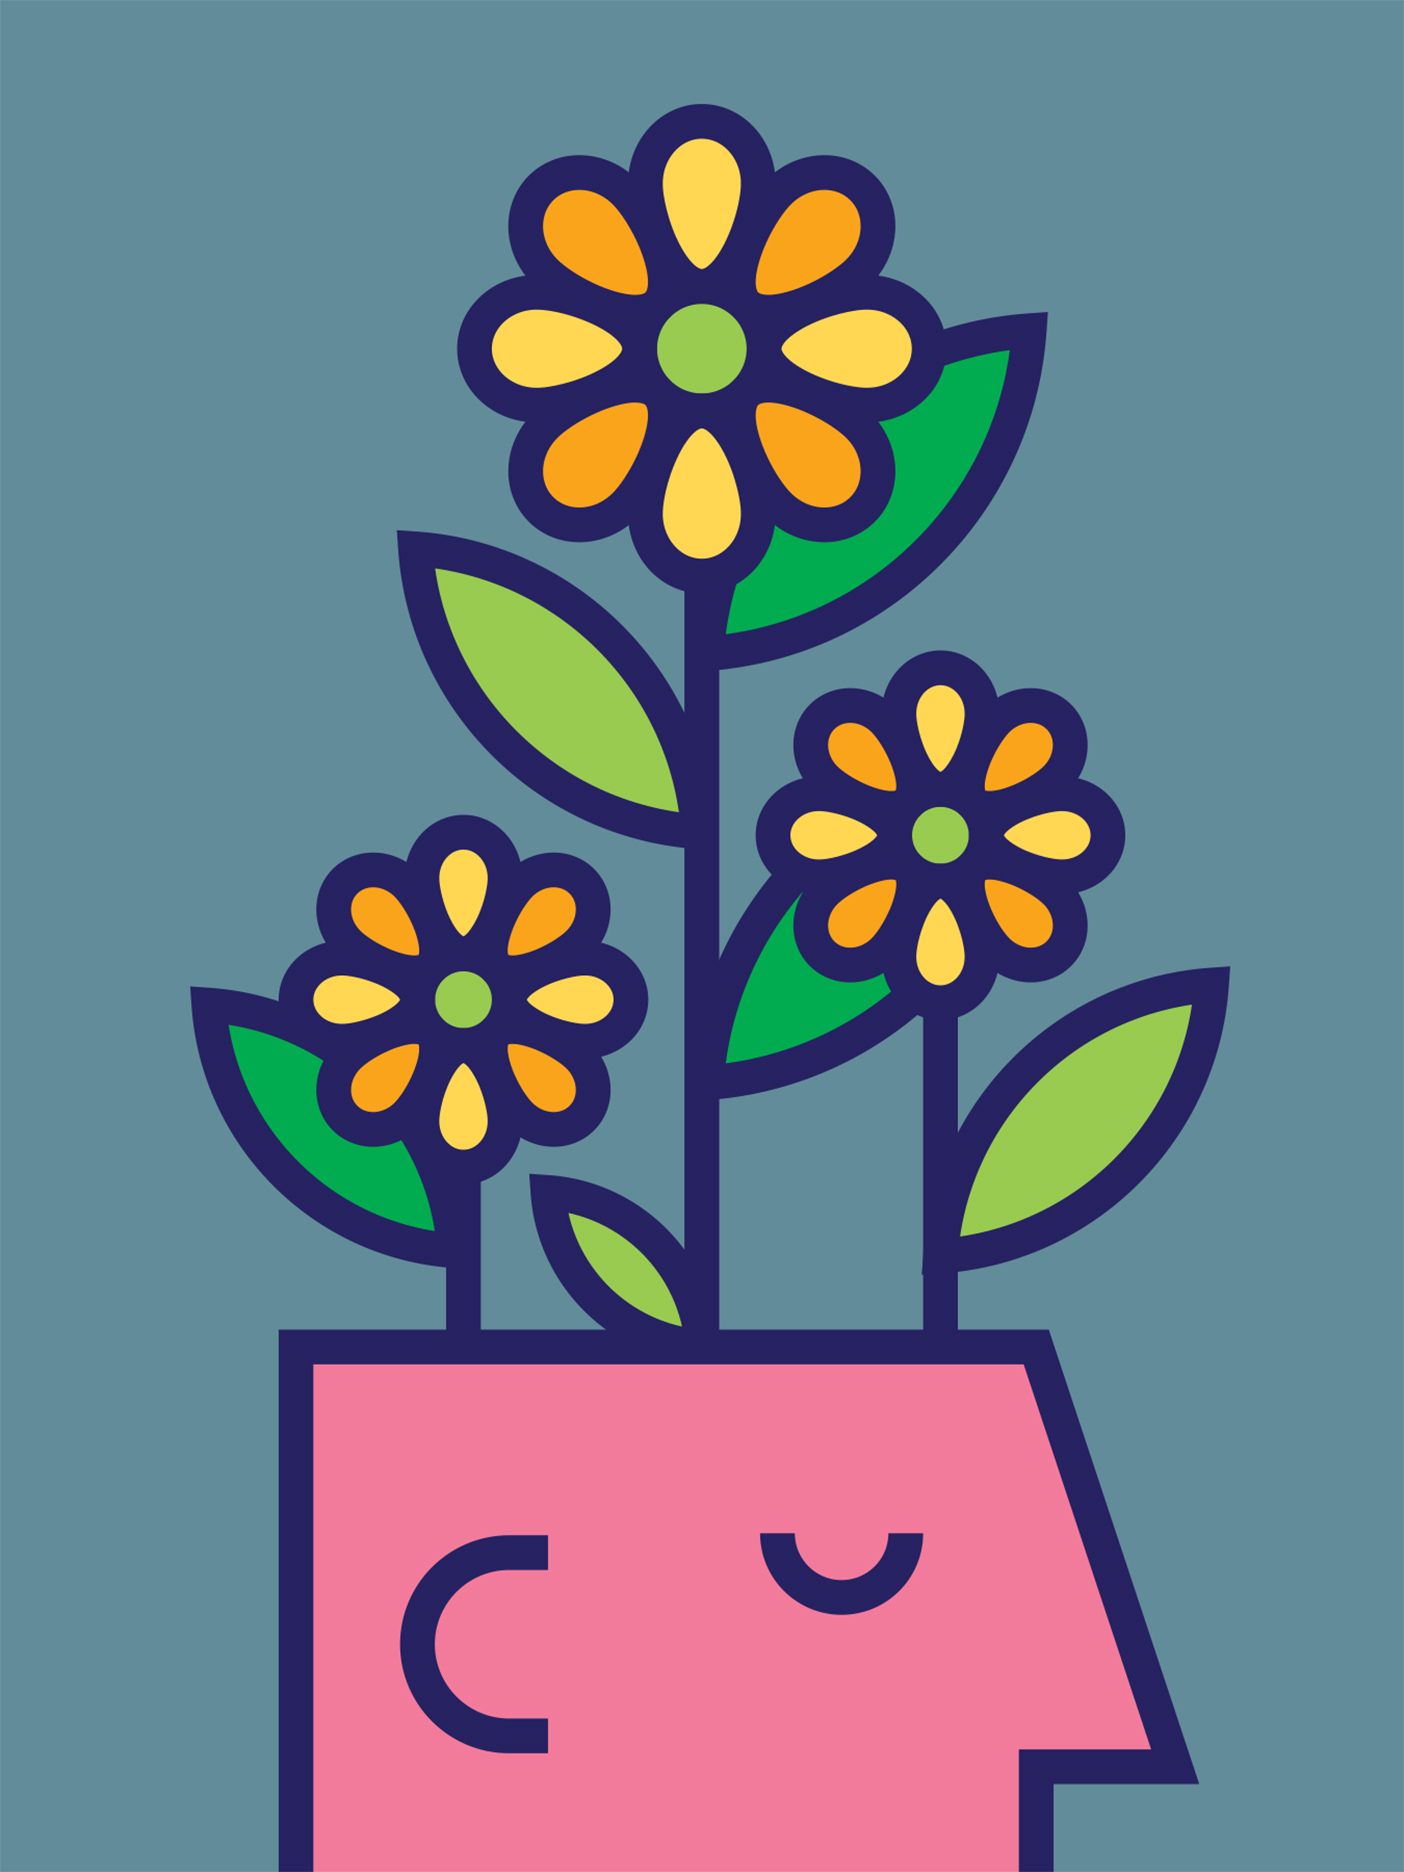 Illustration of a person with flowers growing out of head.